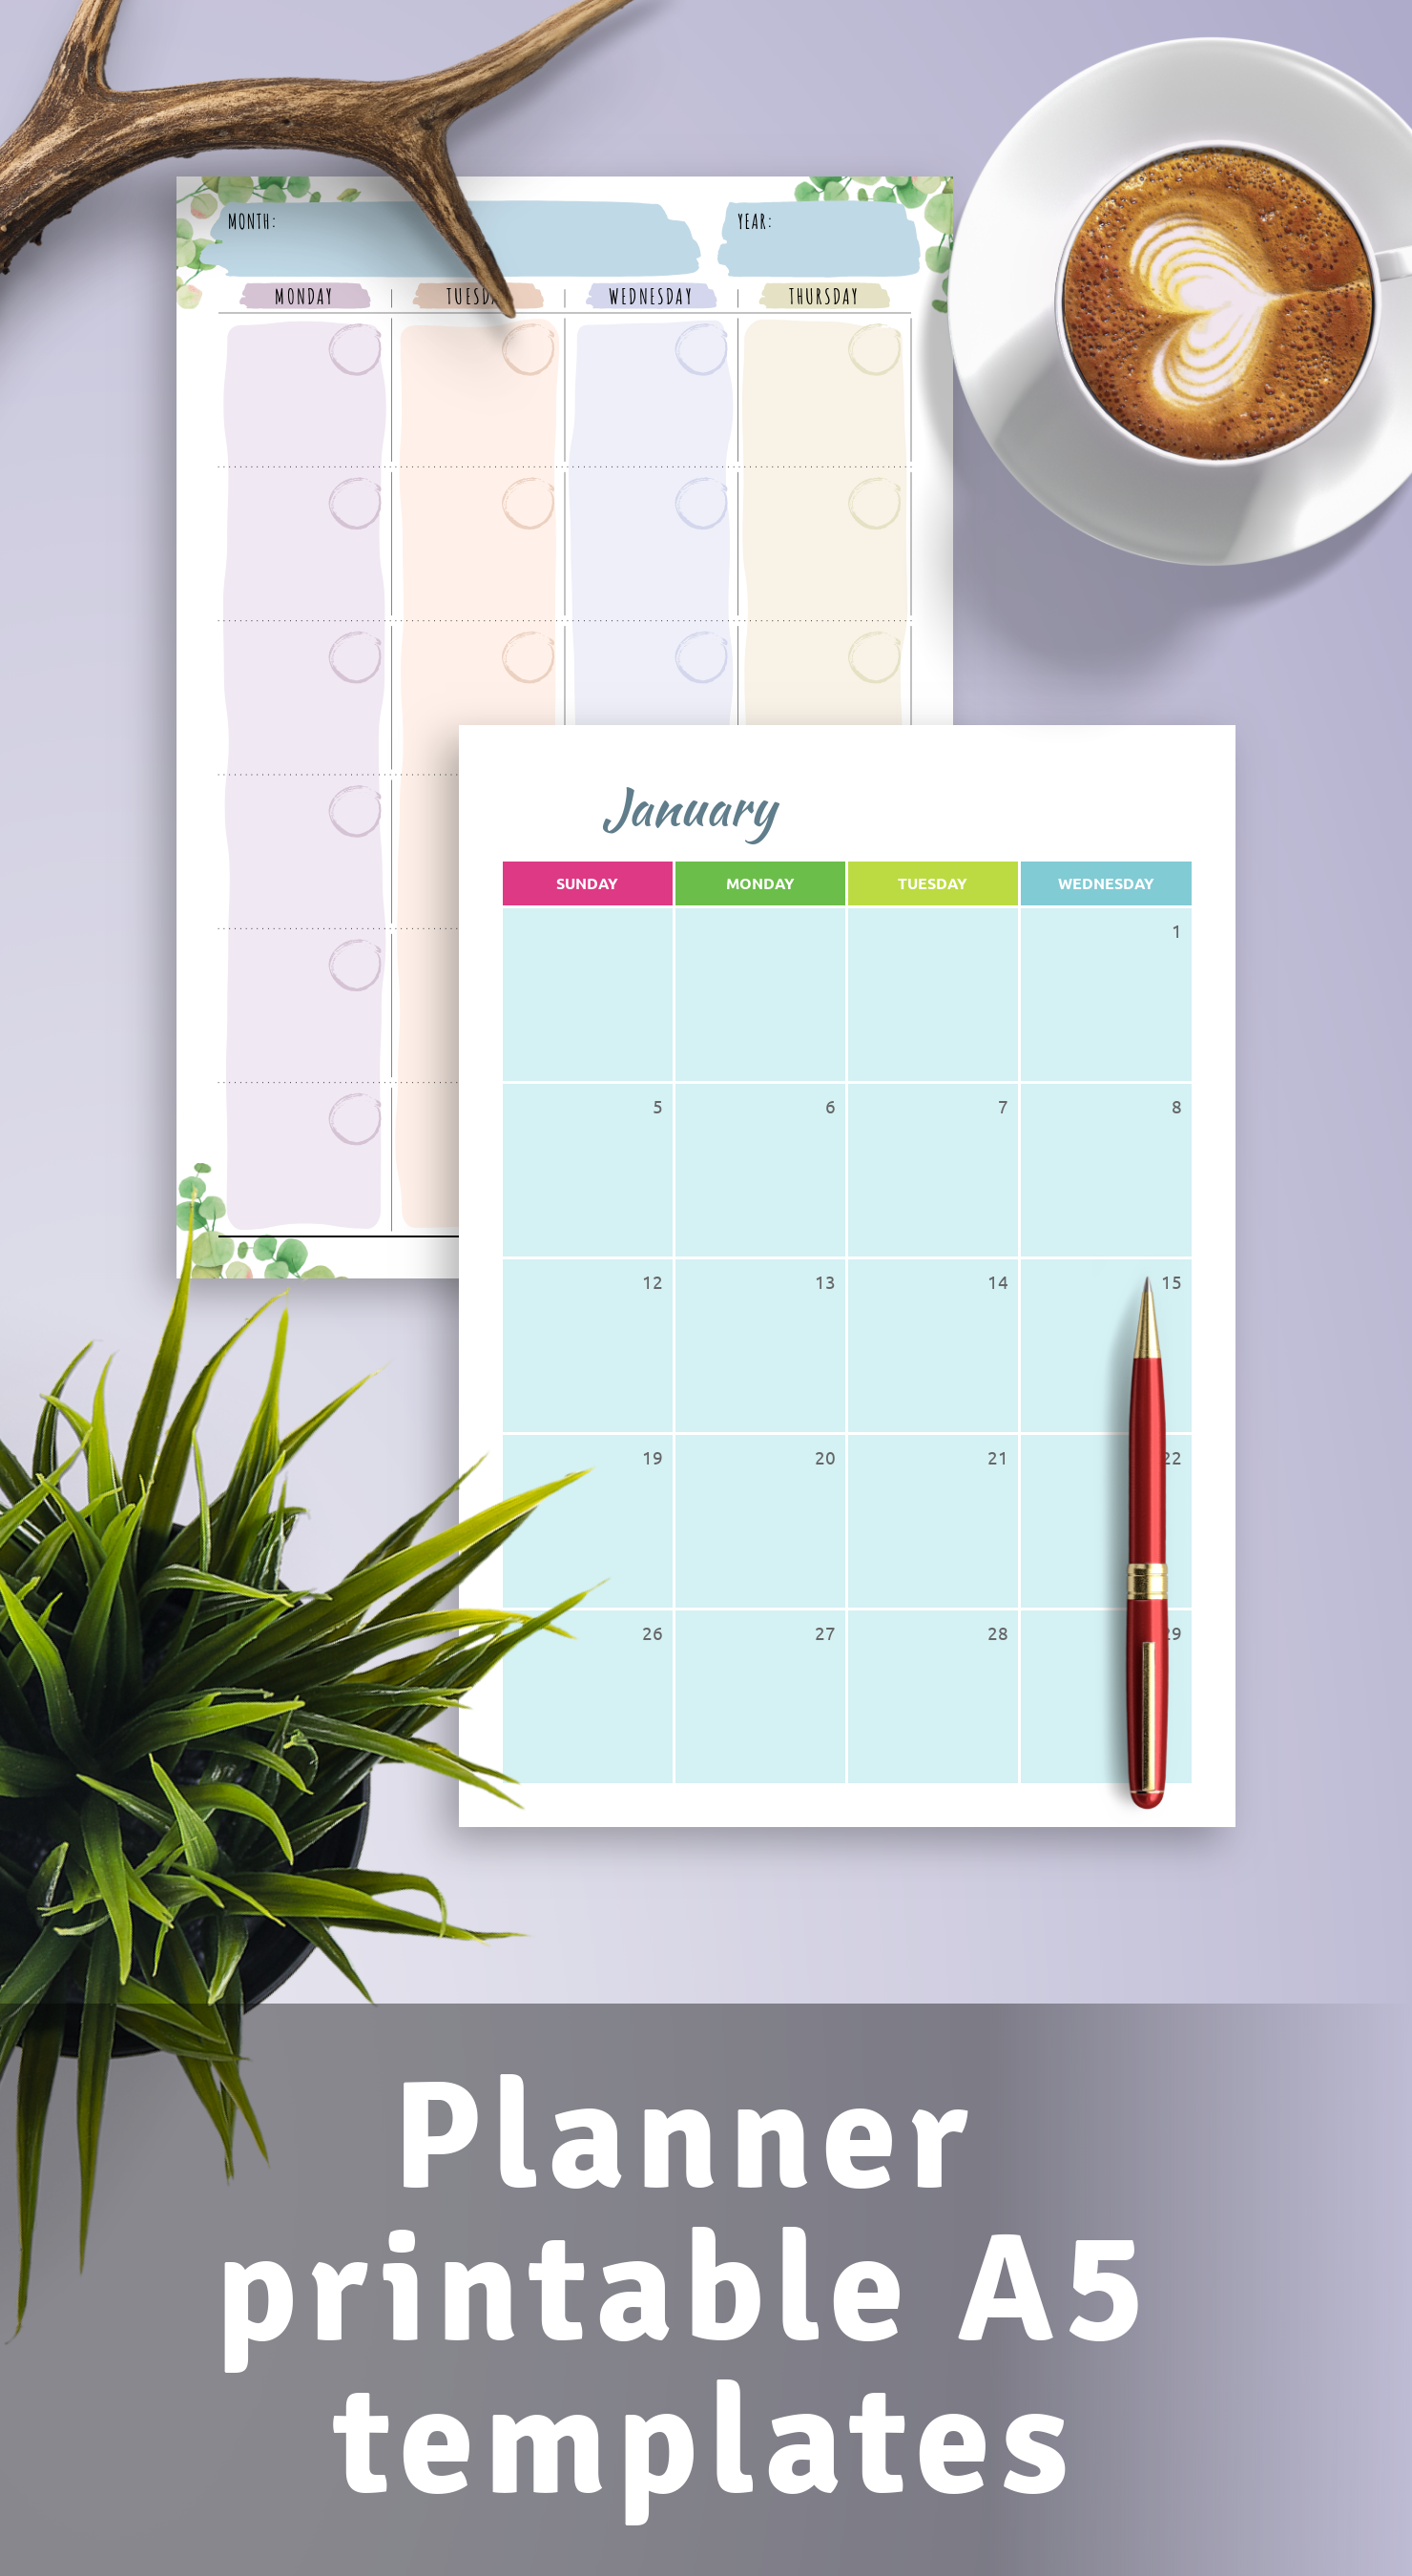 Planner printable A5 templates download PDF